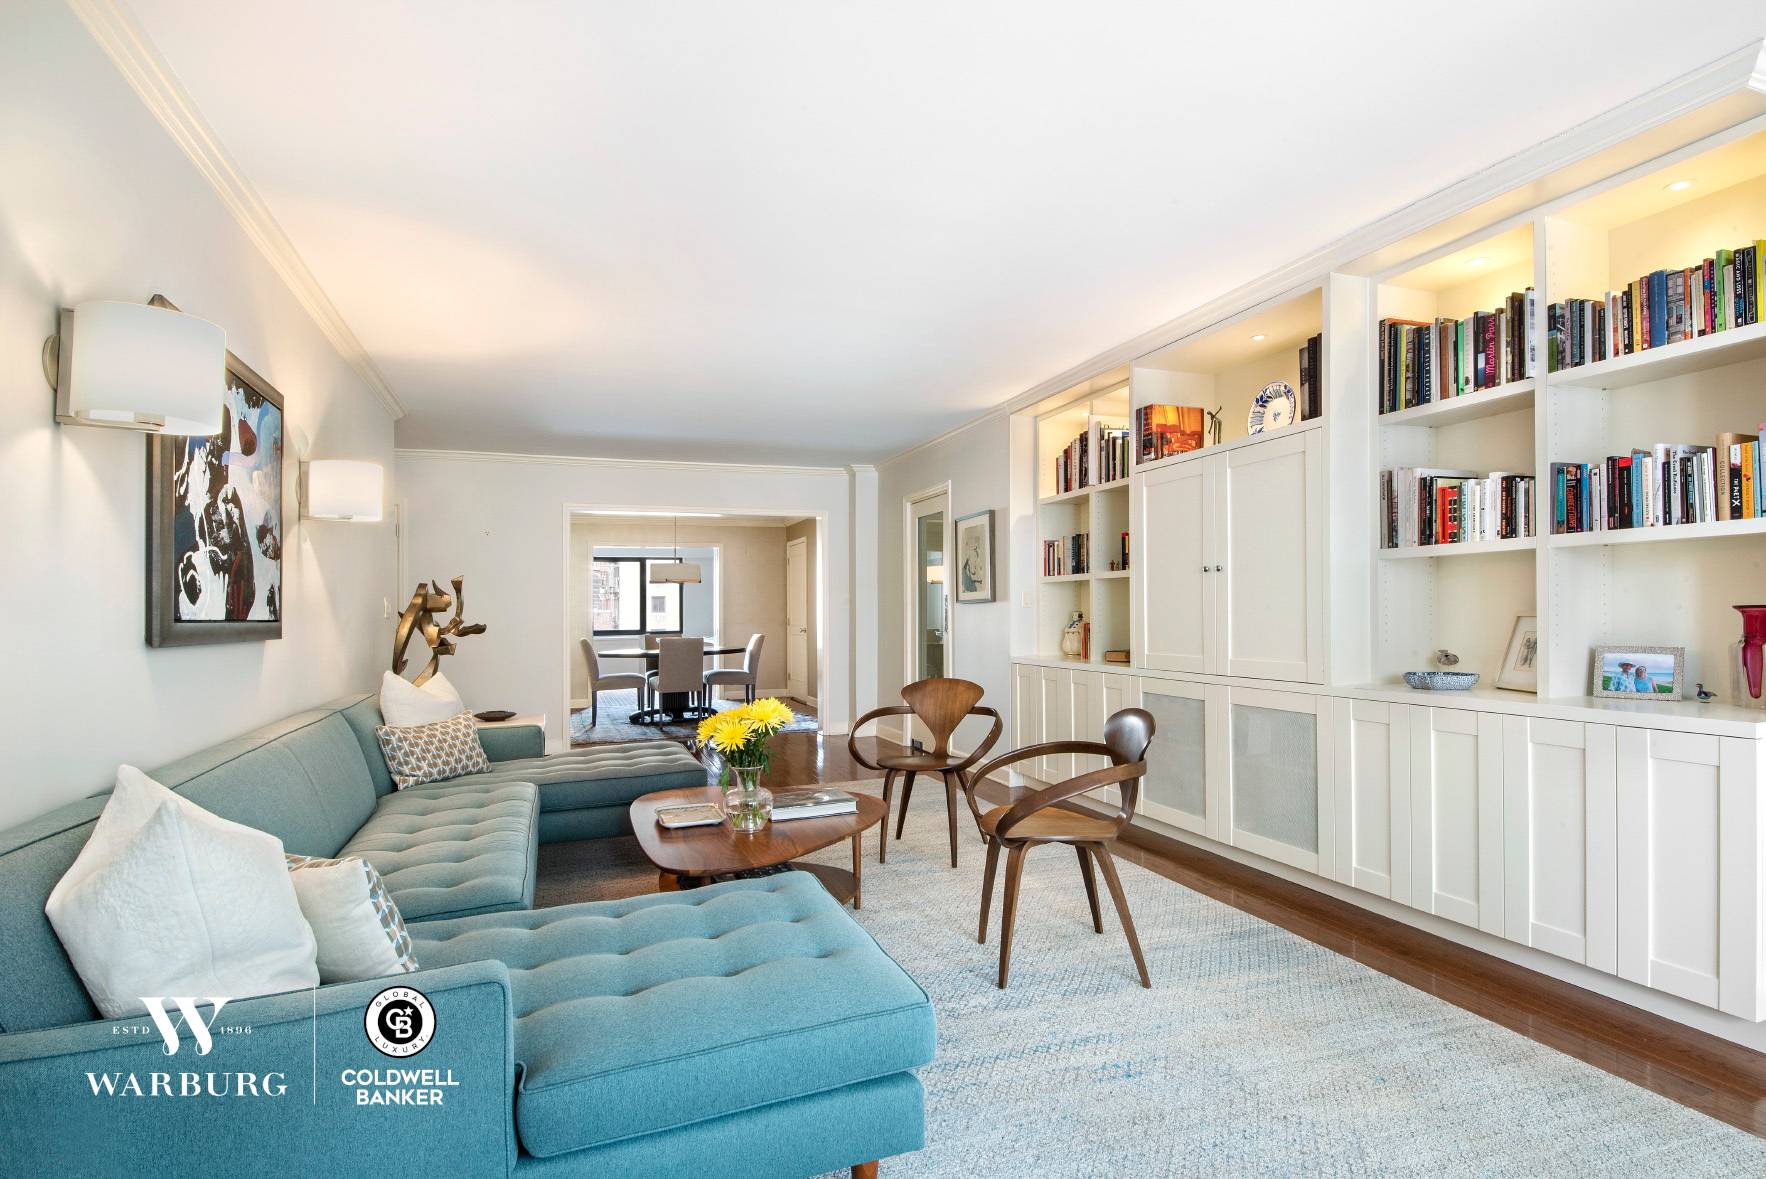 Rarely does a large apartment at the ideally located Park Ten come on the market with such a gracious layout, direct Central Park views and impeccable renovation.